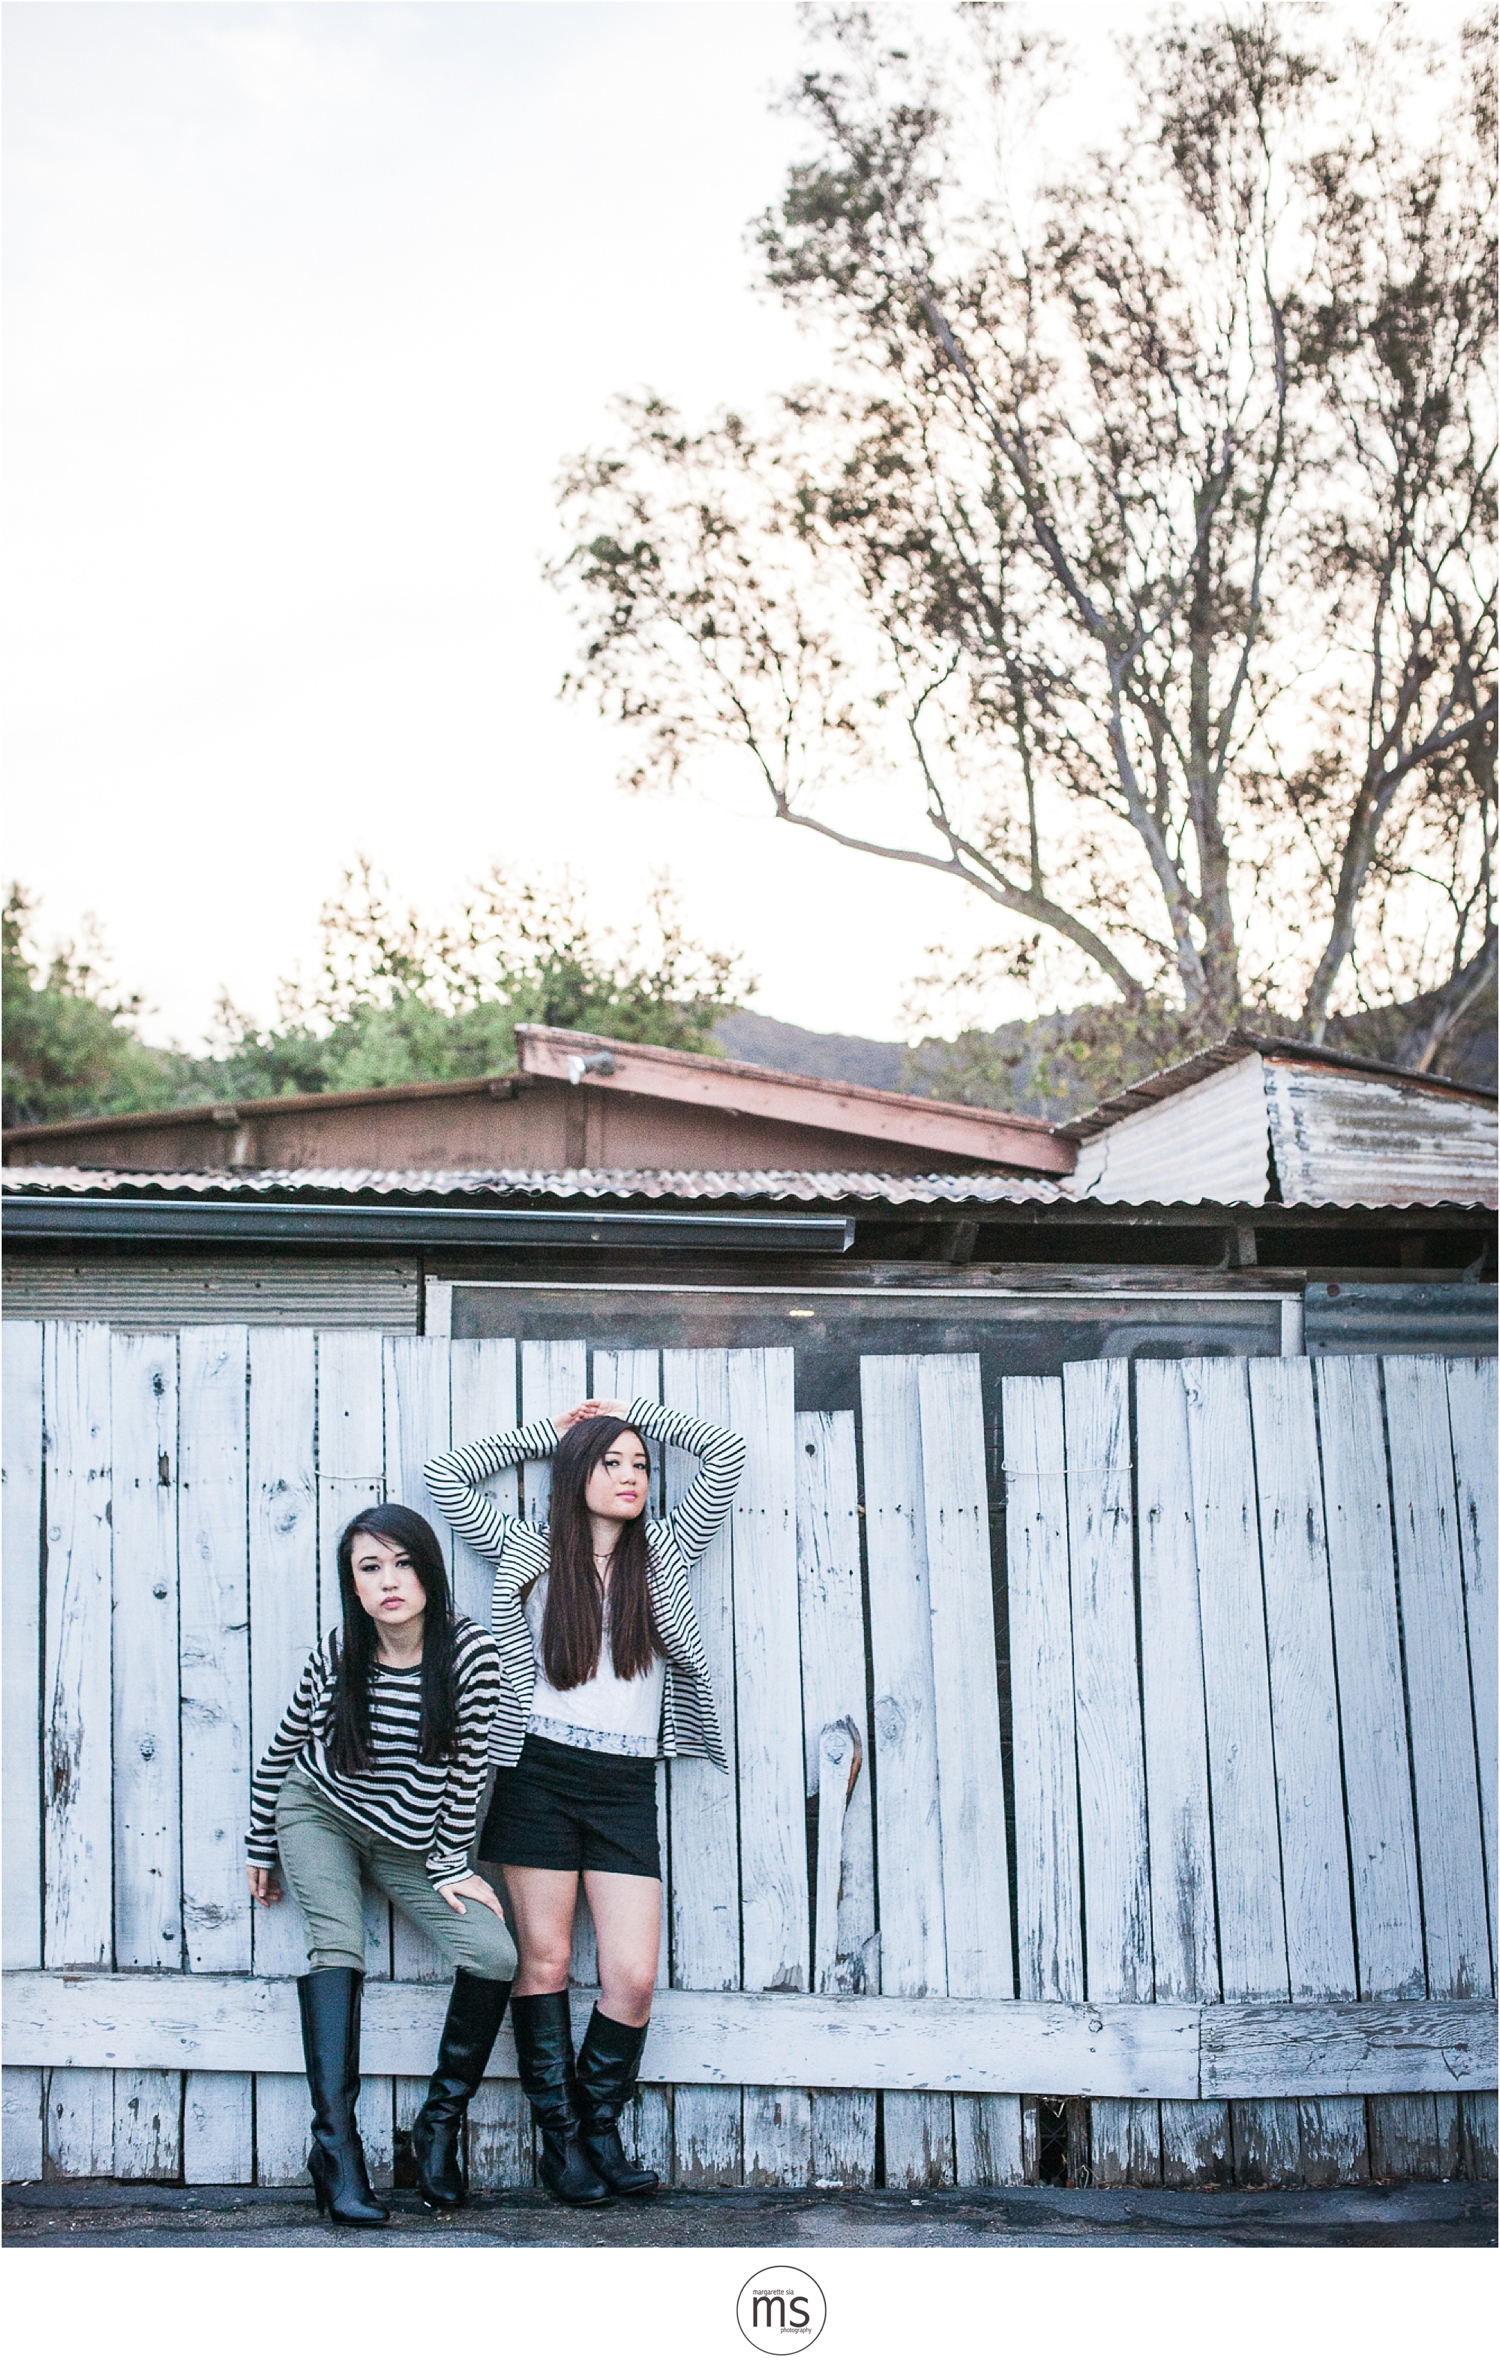 Tiffany & Natalie Old Town Temecula Margarette Sia Photography_0095